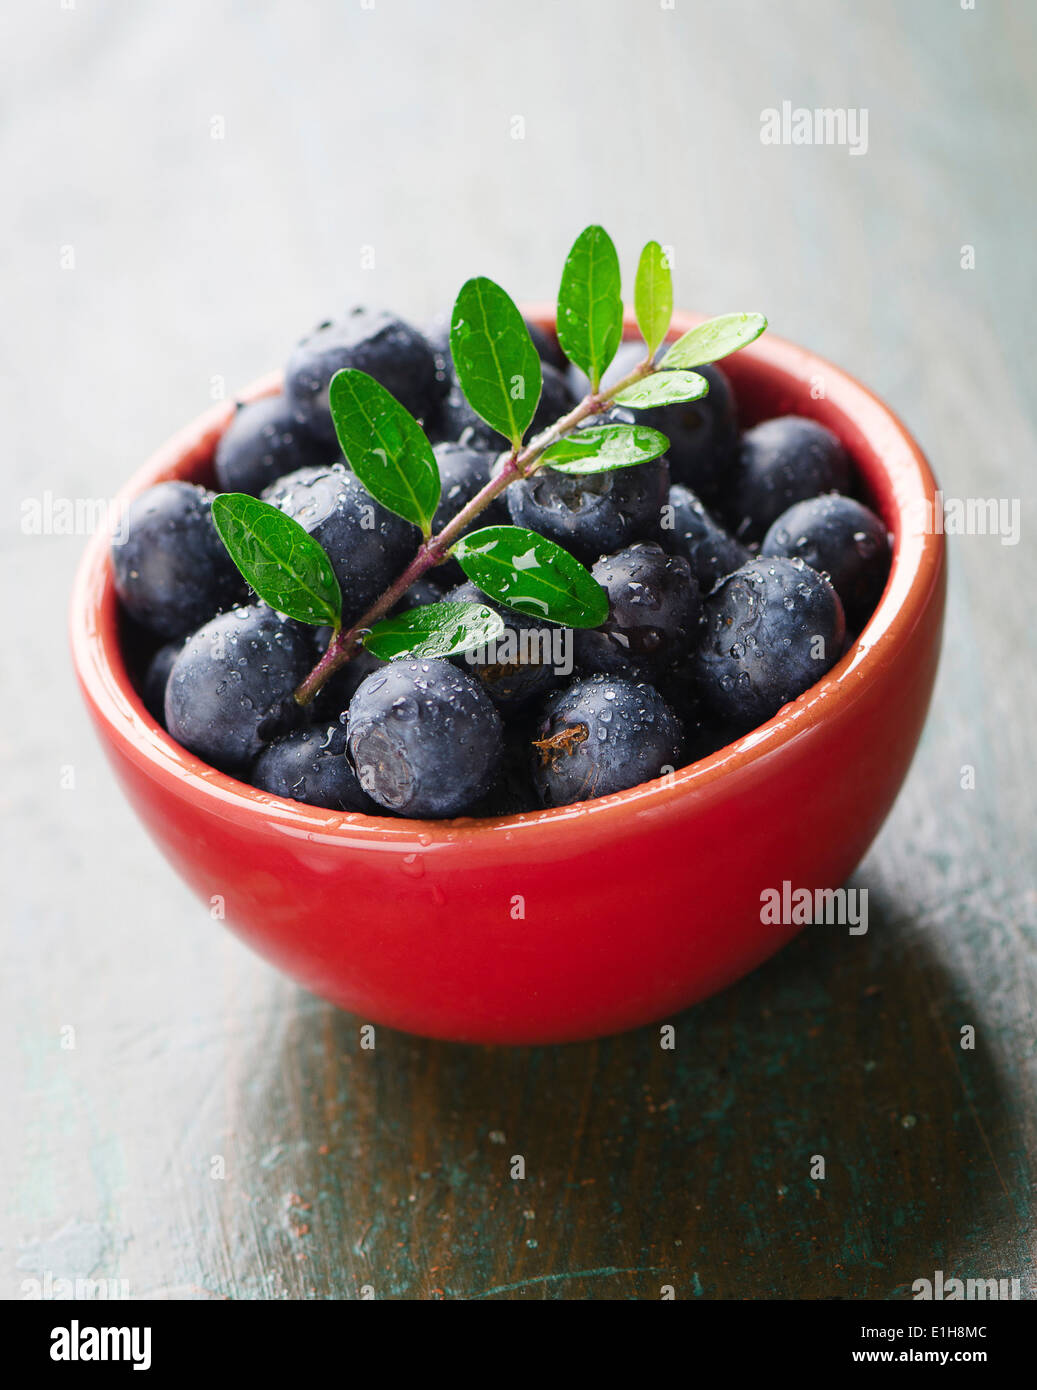 Bowl of blueberries Stock Photo